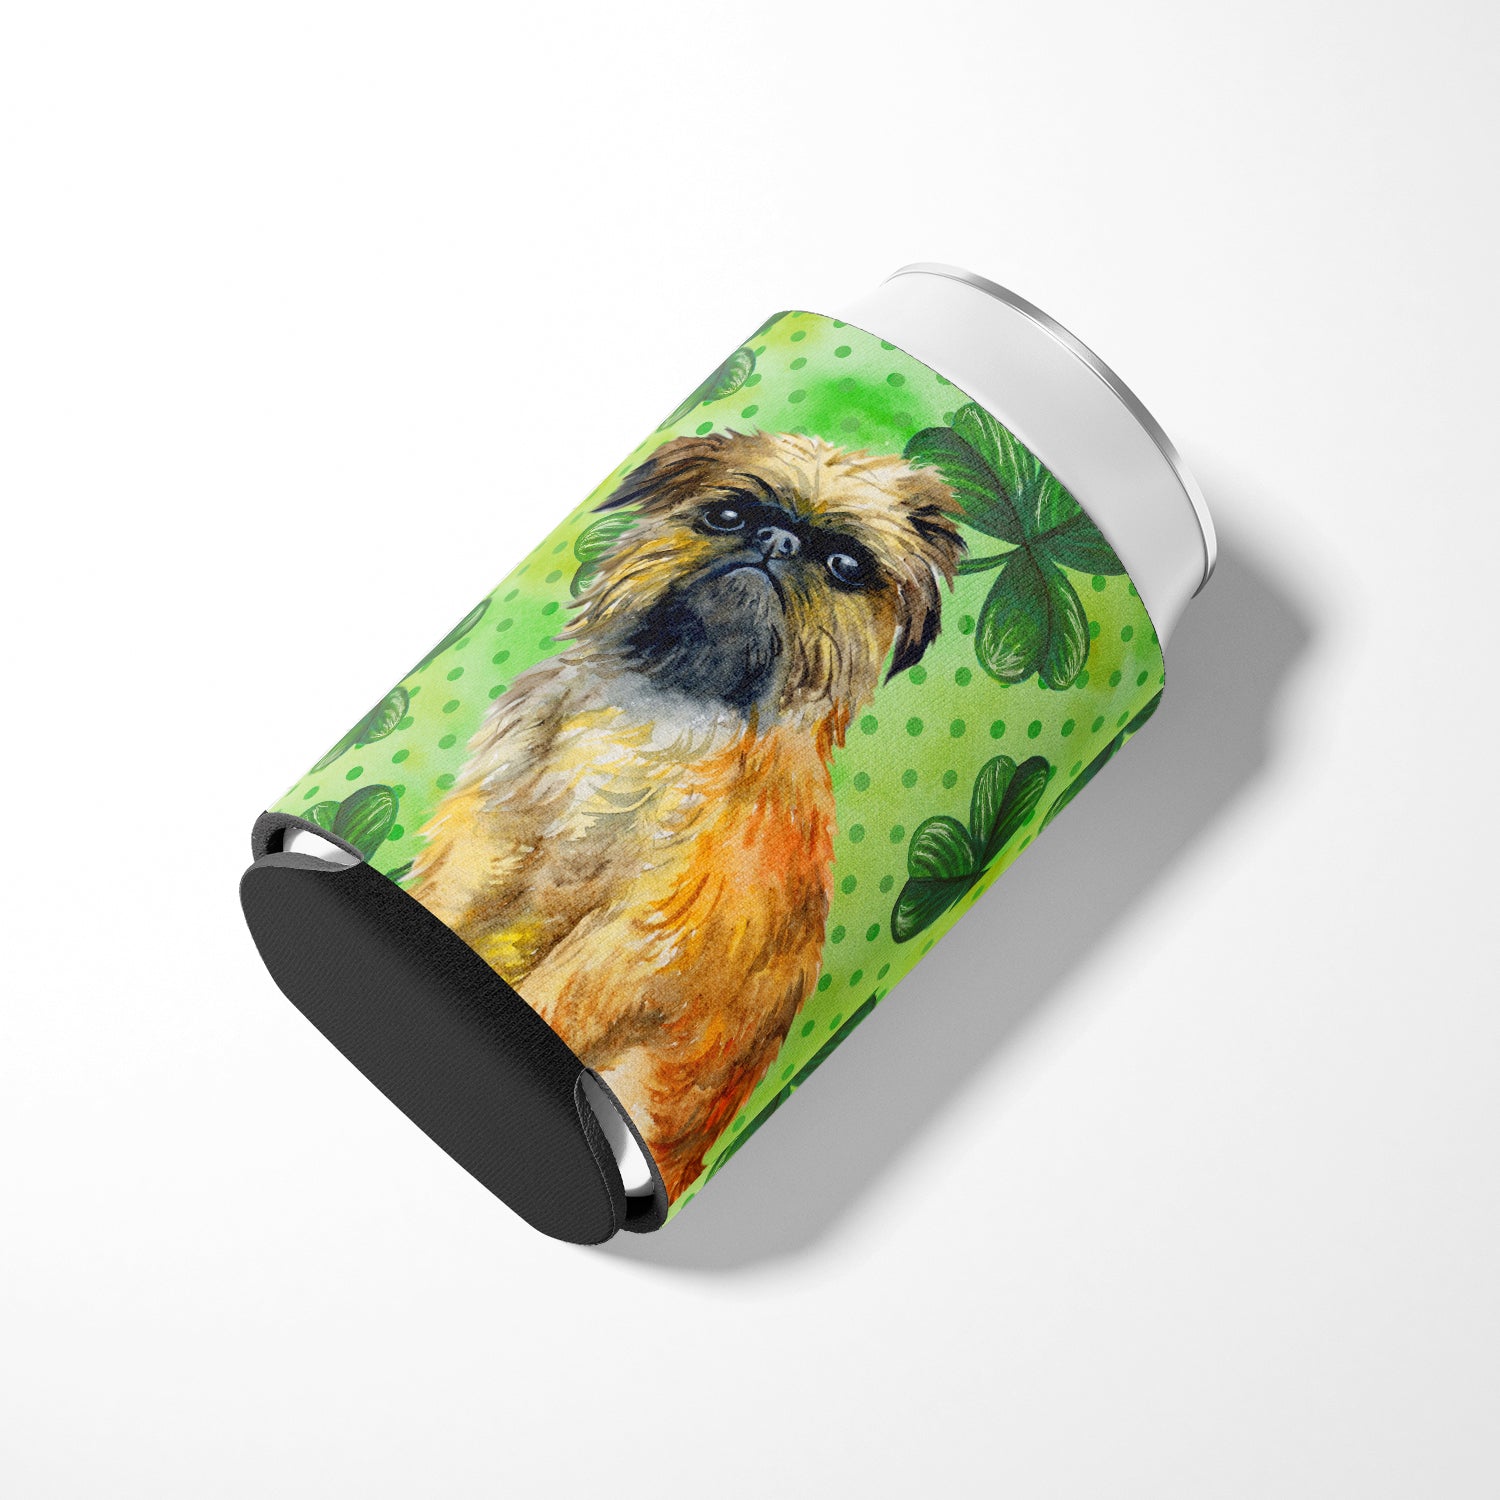 Brussels Griffon St Patrick's Can or Bottle Hugger BB9861CC